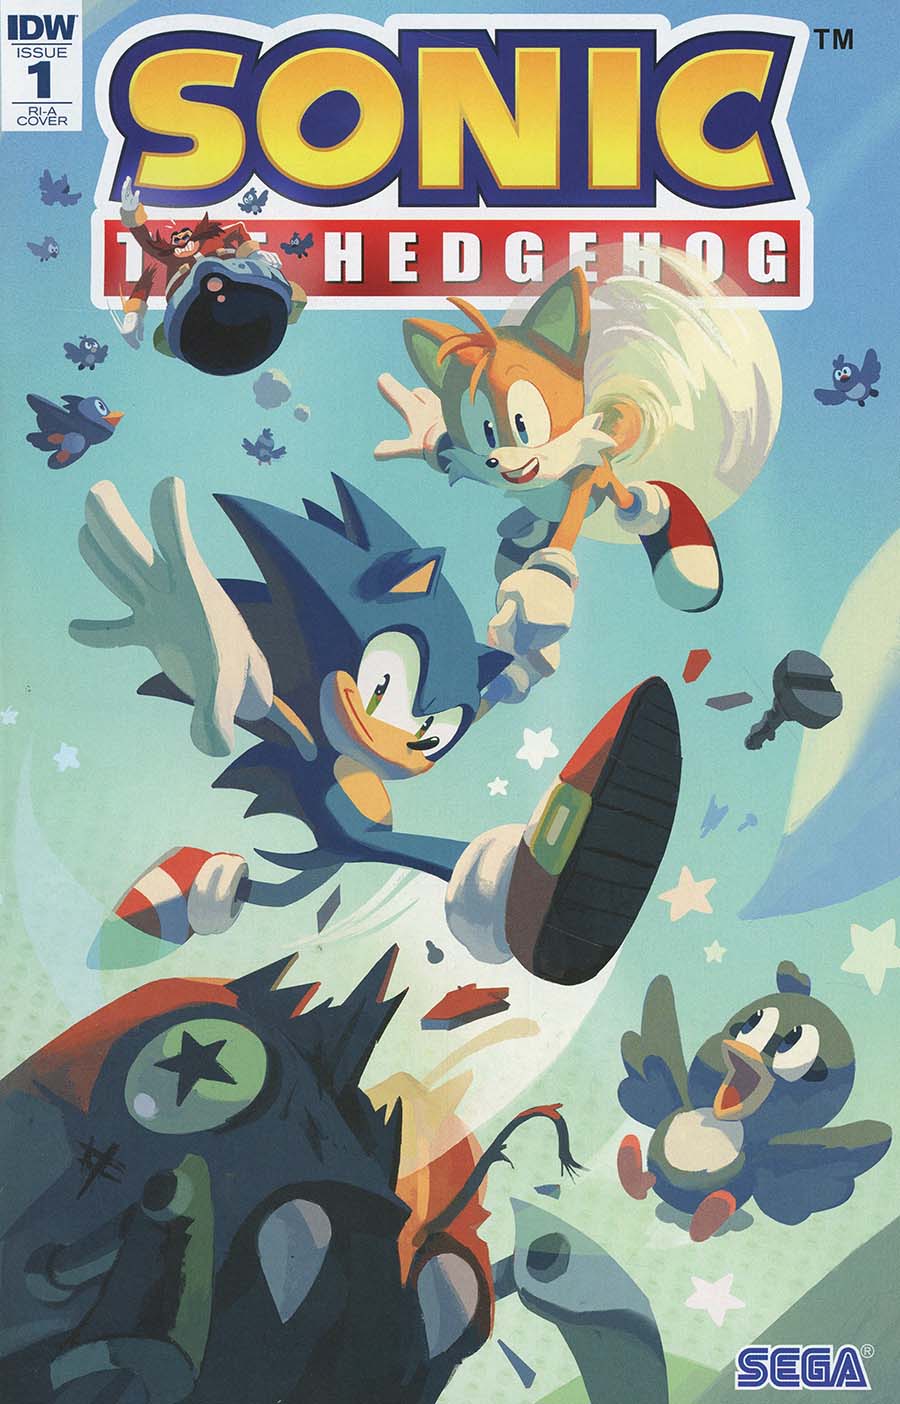 Sonic The Hedgehog Vol 3 #1 Cover C Incentive Nathalie Fourdraine Variant Cover